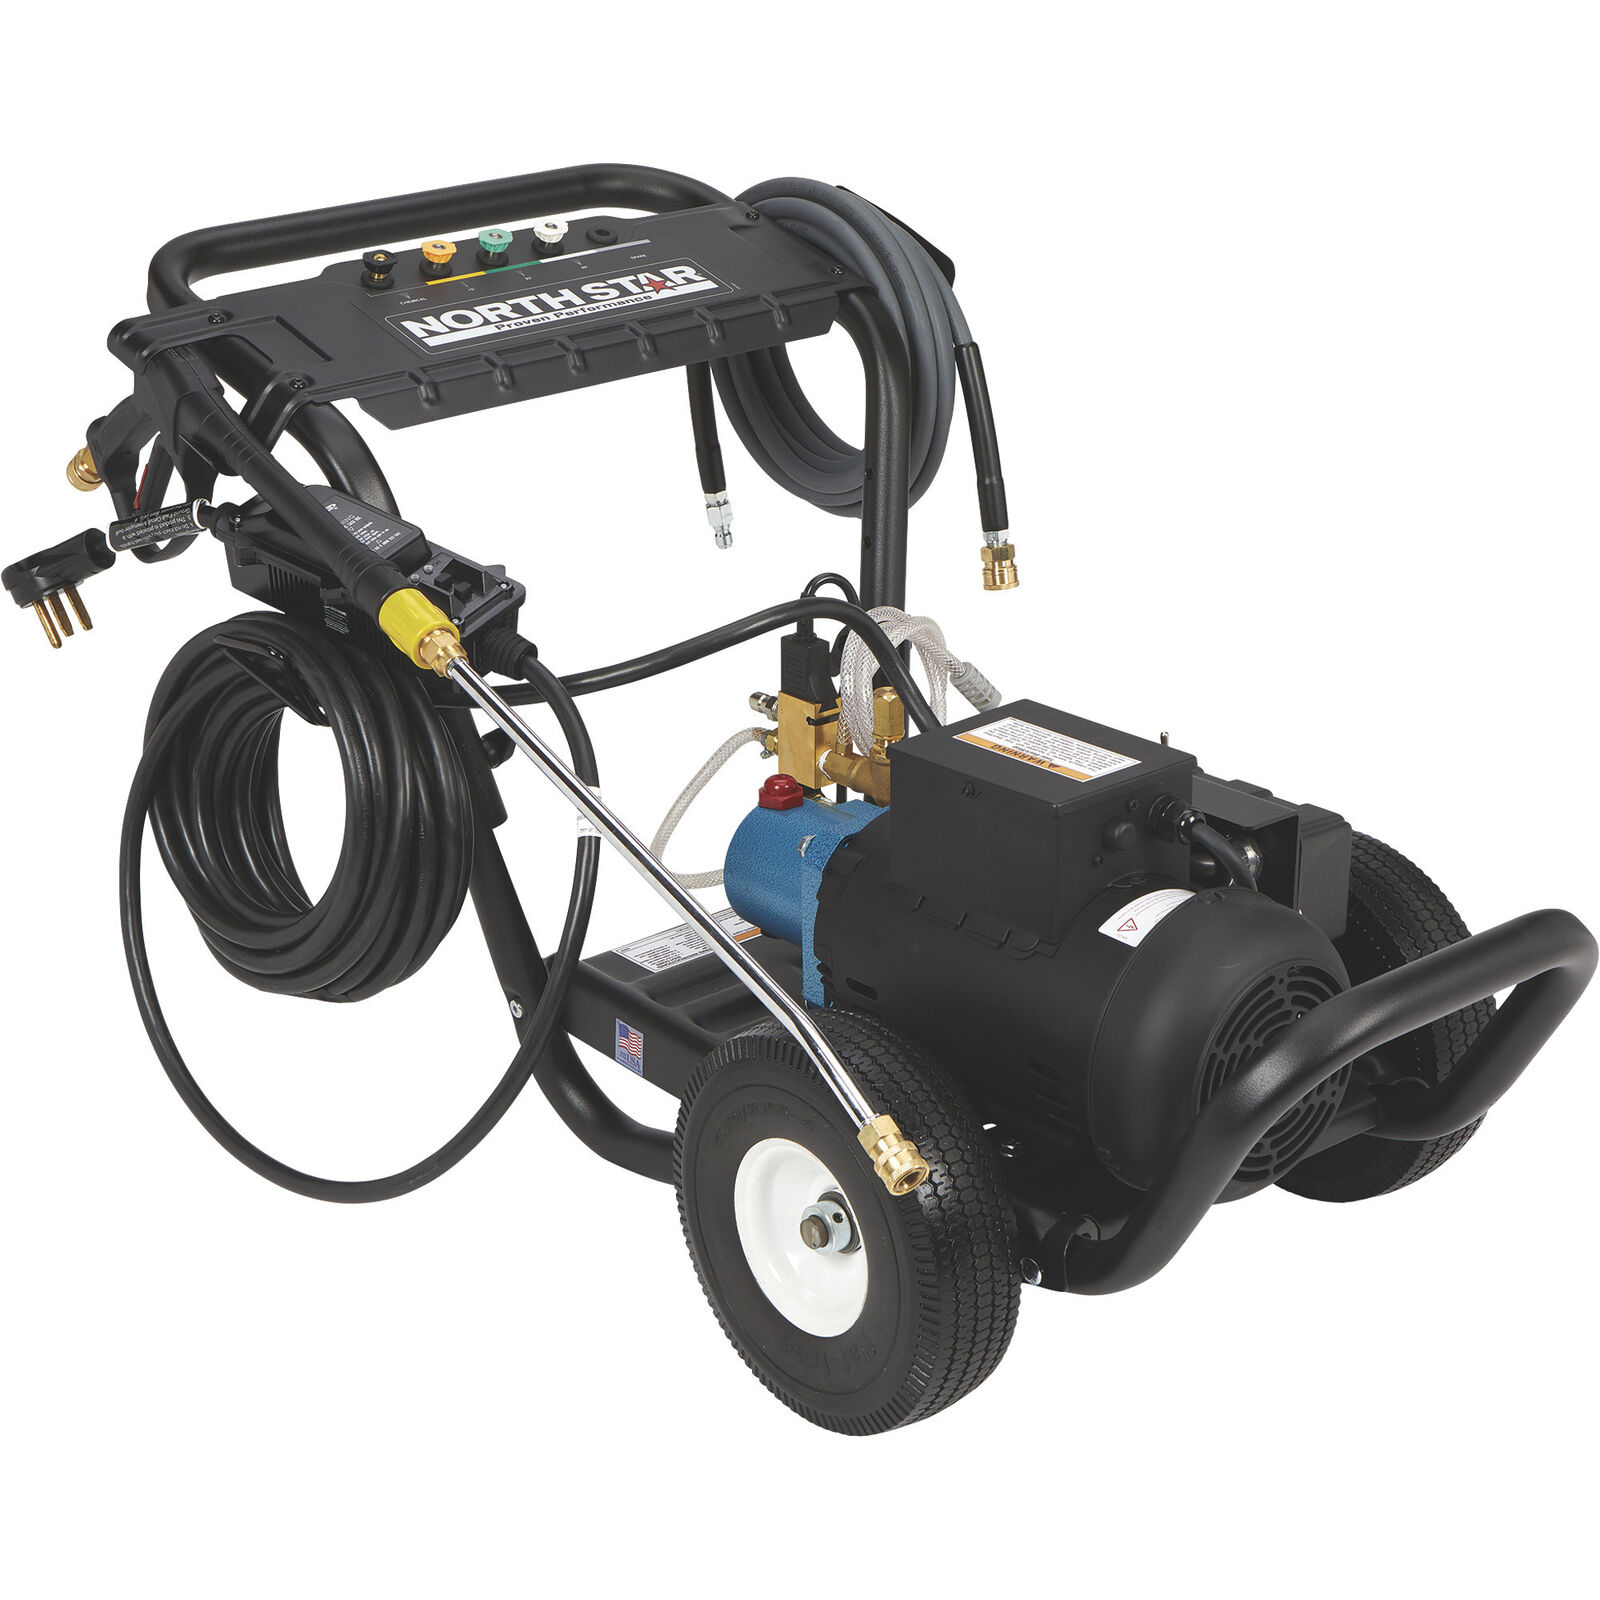 NorthStar Electric Cold Water Total Start/Stop Pressure Washer,3000 PSI, 2.5